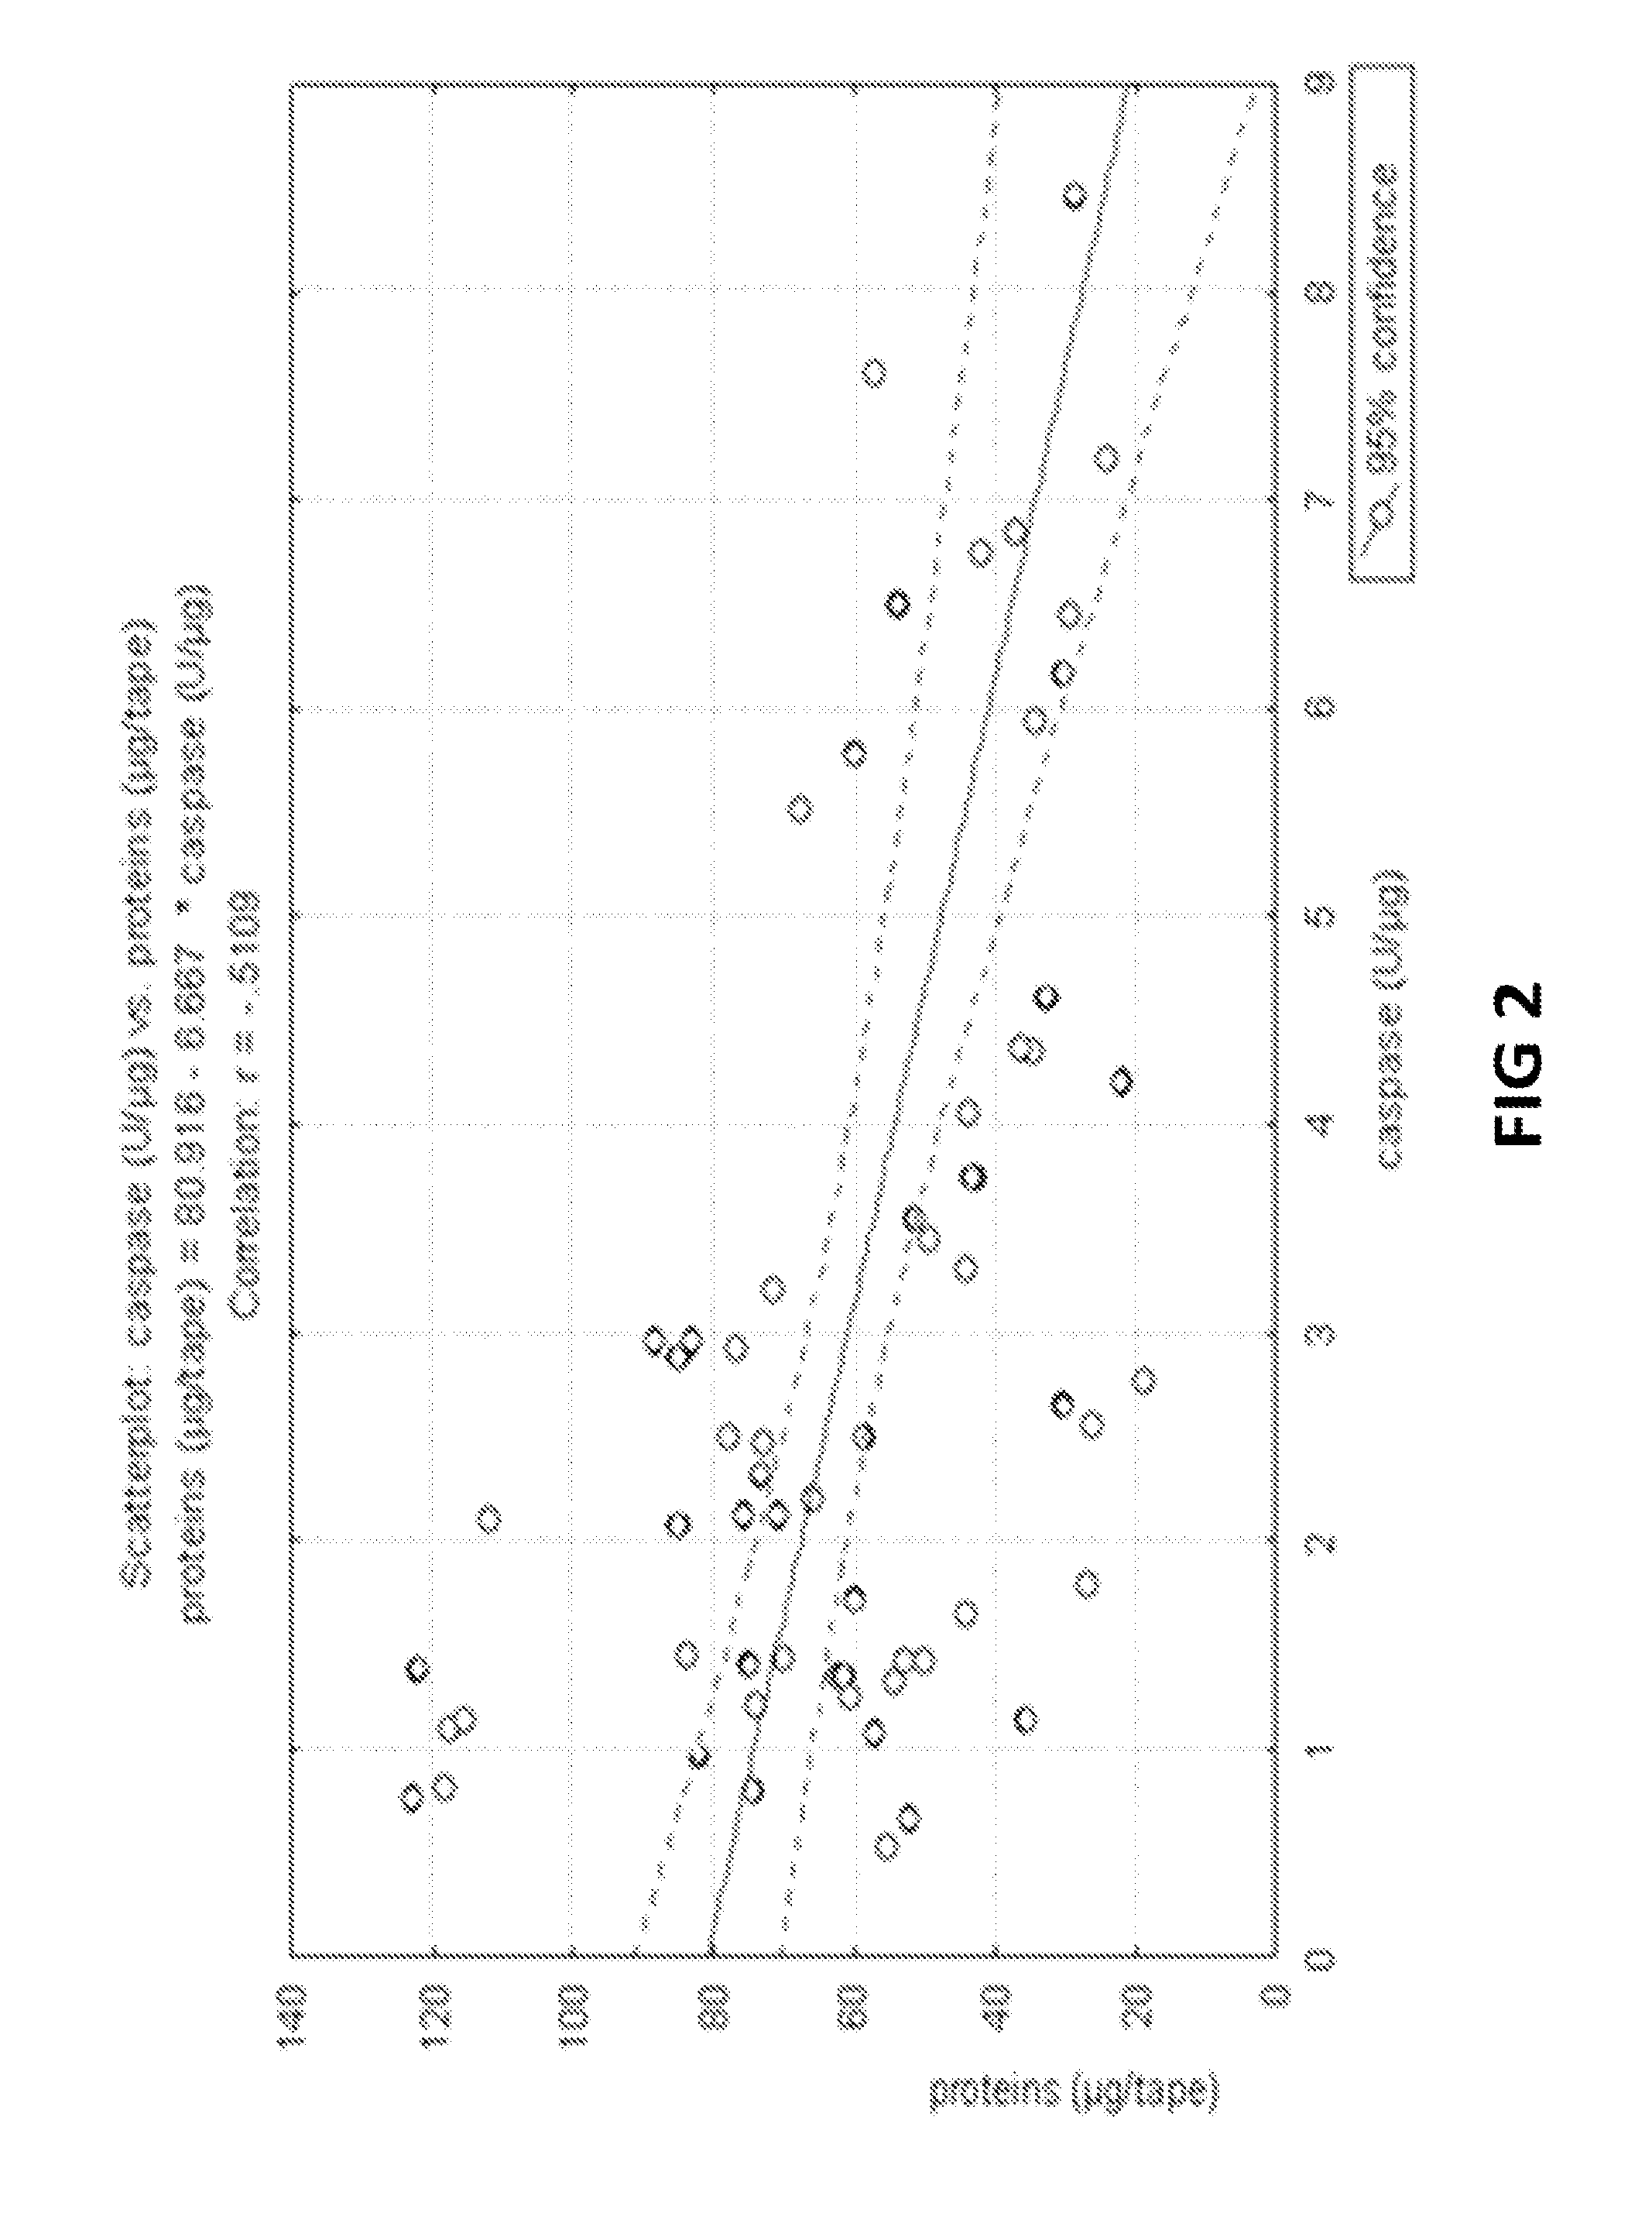 Methods For Activating Caspase-14 Expression In Human Skin